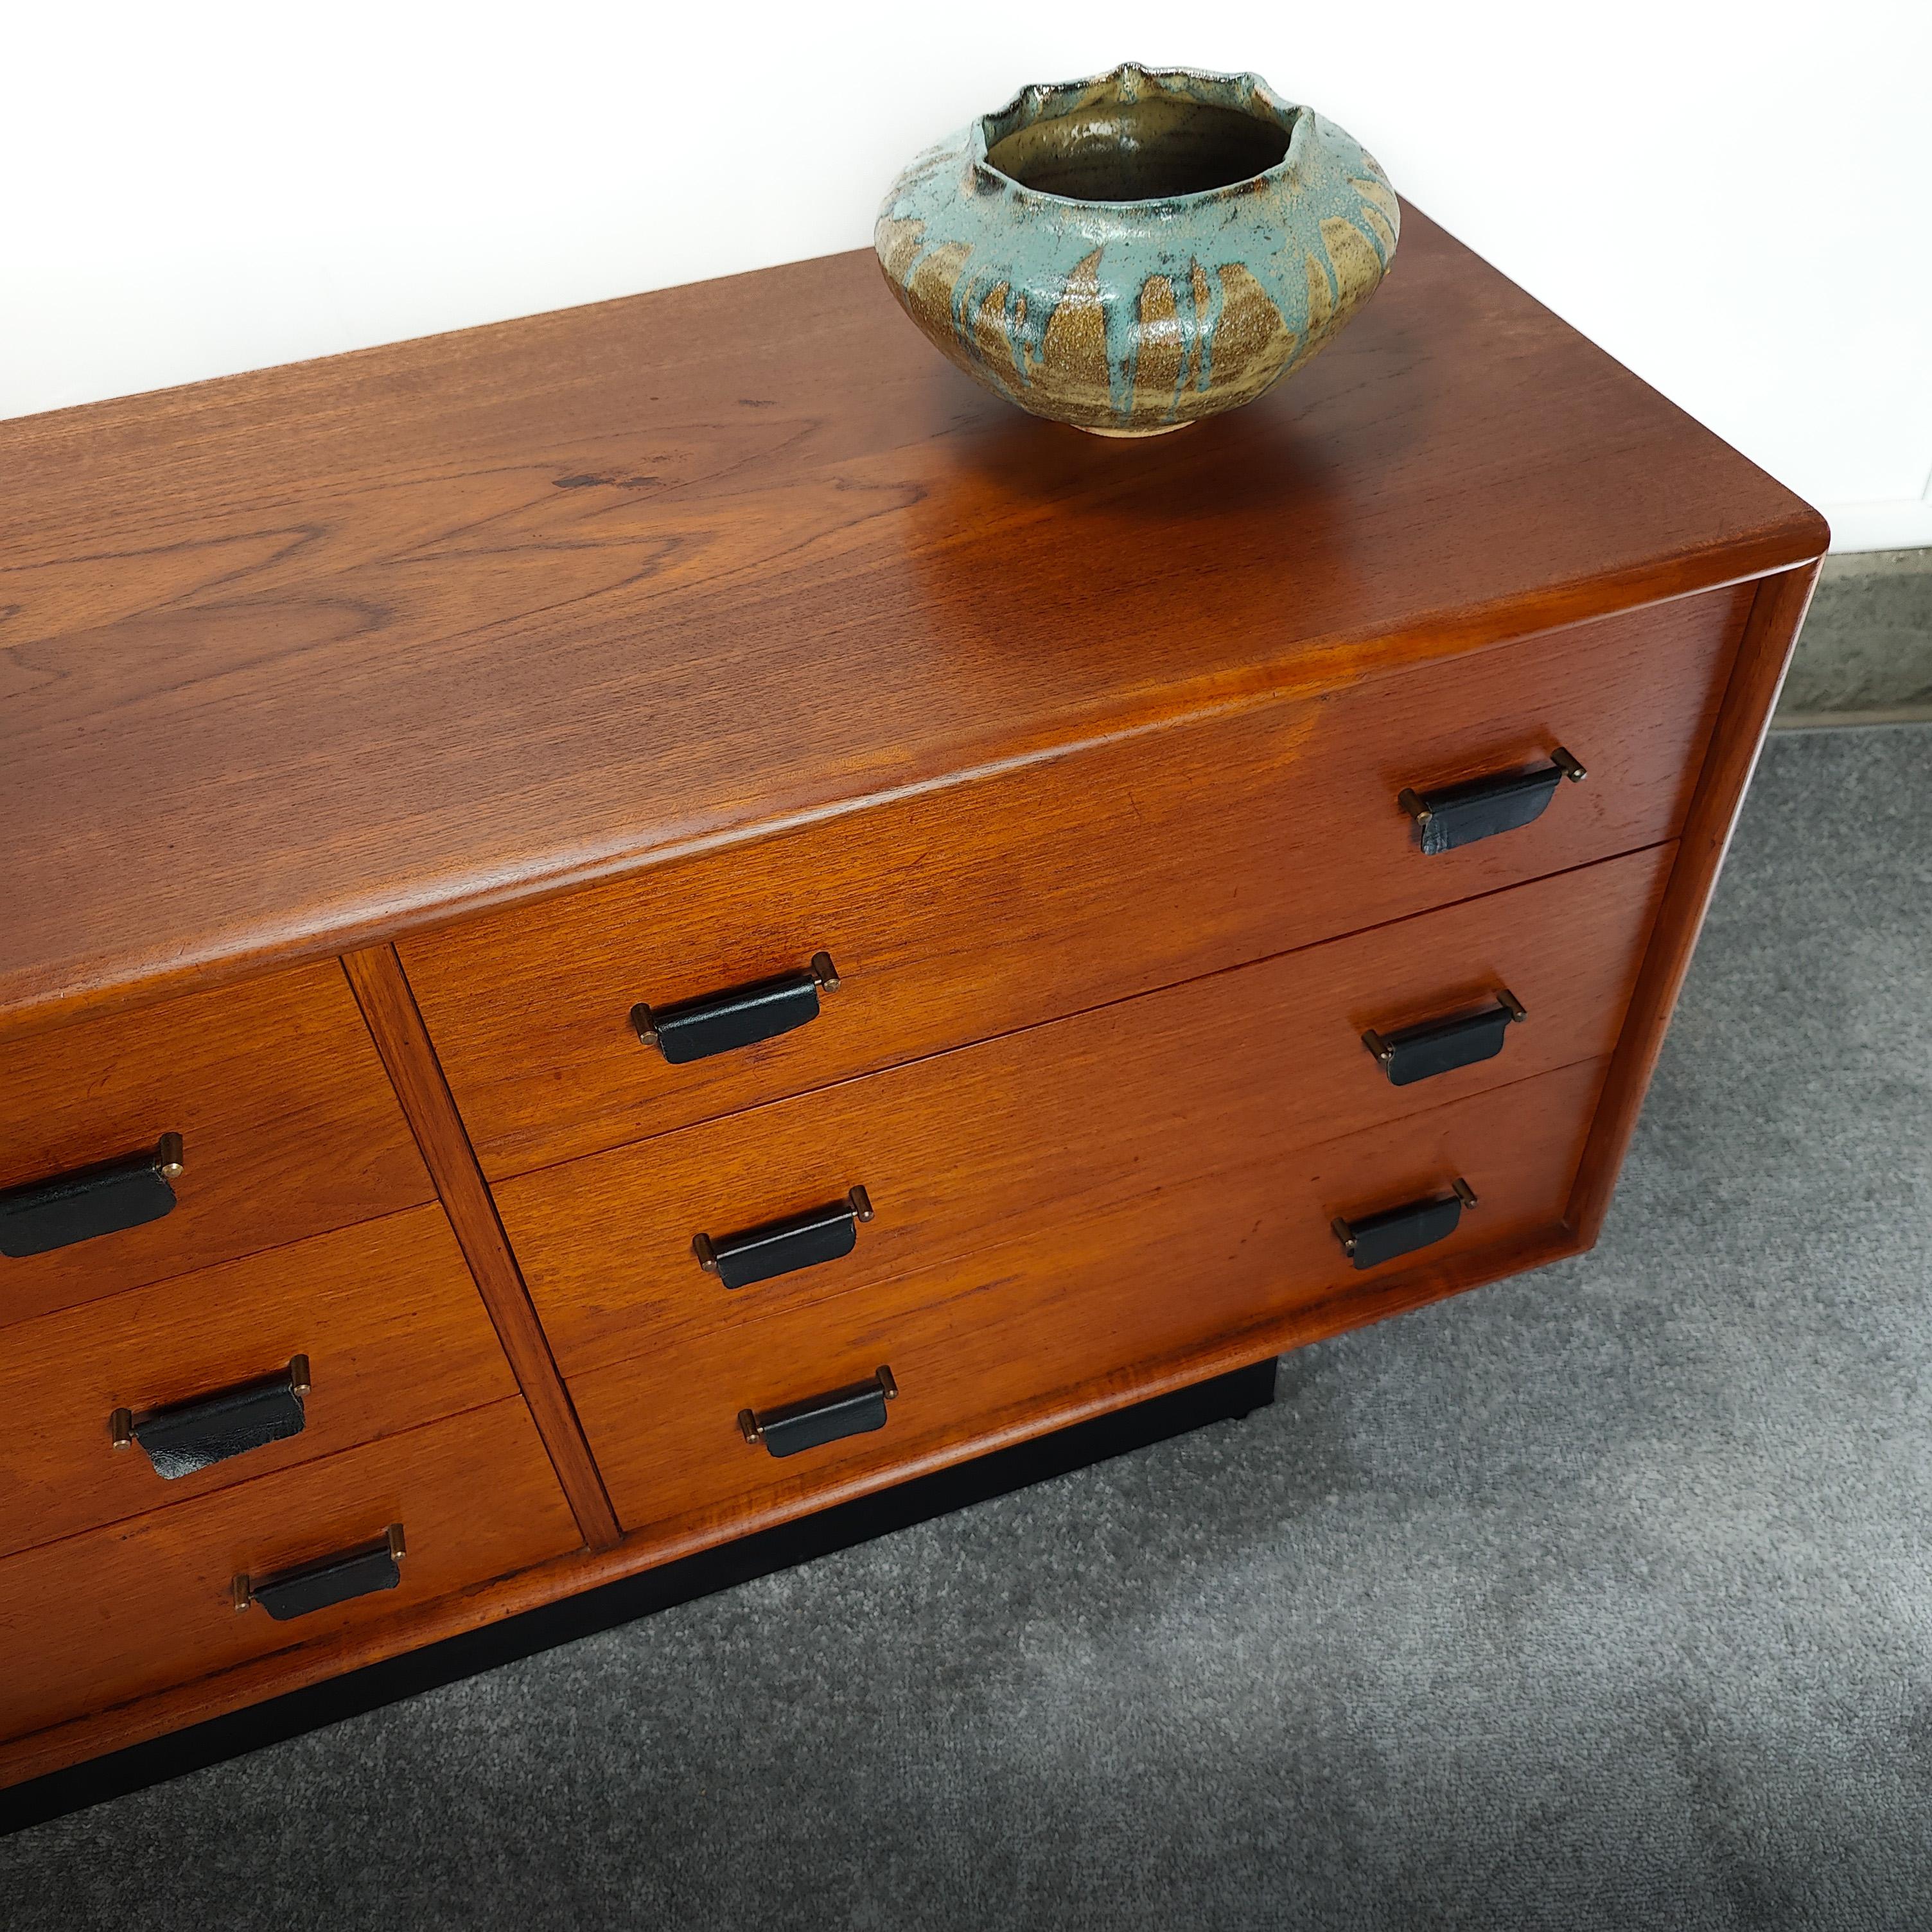 Striking 9 drawer pedestal plinth teak dresser by Intercontinental Design of Canada. Features brass hardware with leather pulls and base. Rich teak grain throughout. Measures approximately 76w x 18d x 27h. Stamped 